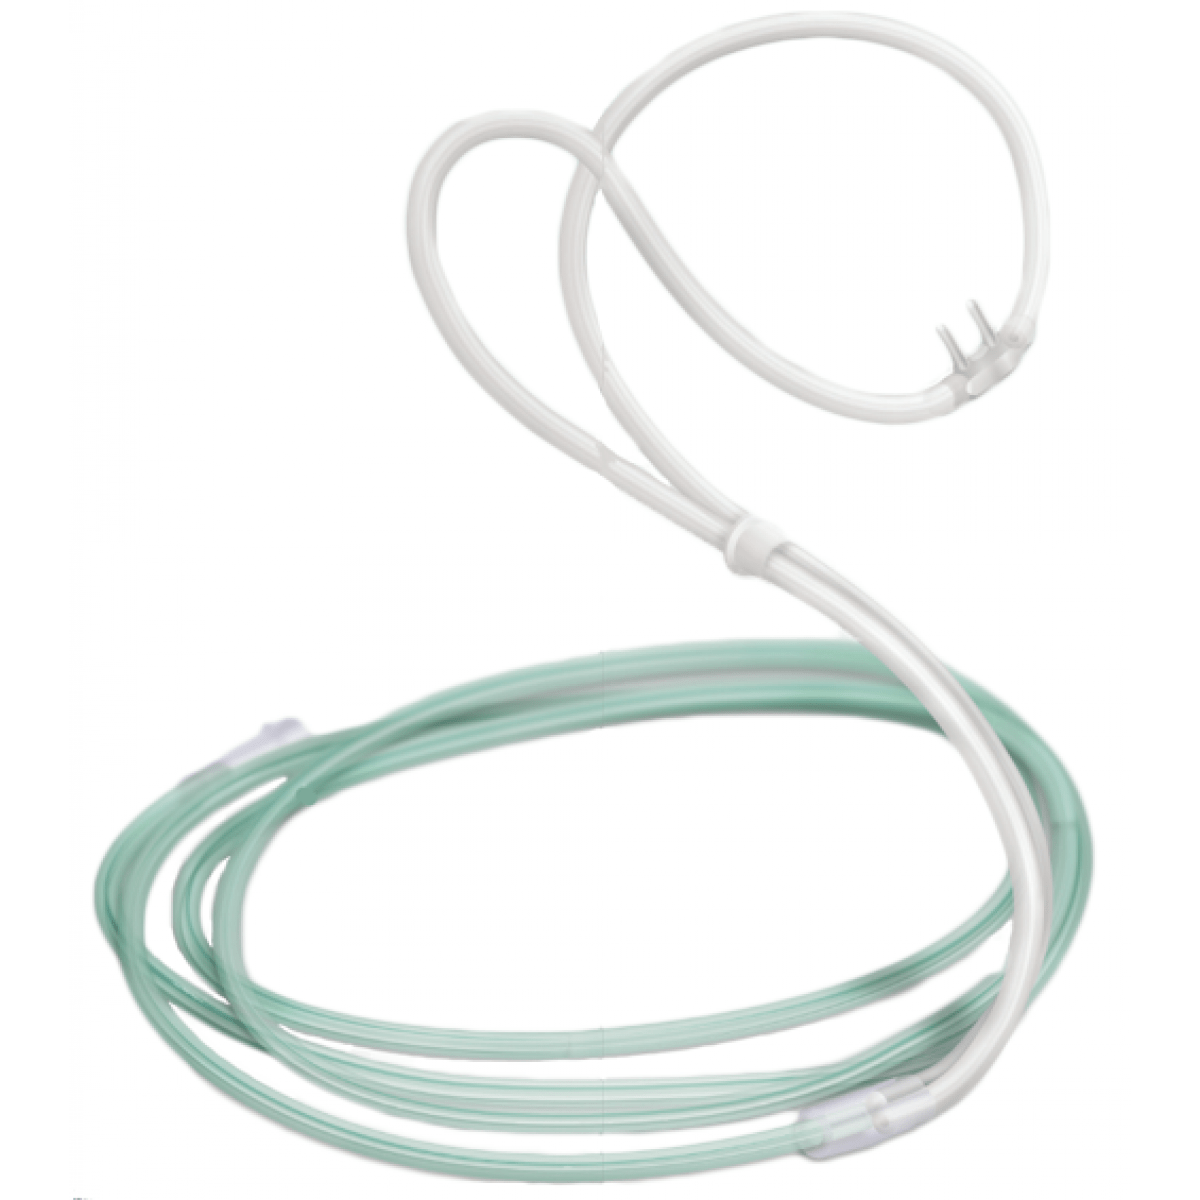 Salter Oxygen Therapy Cannula